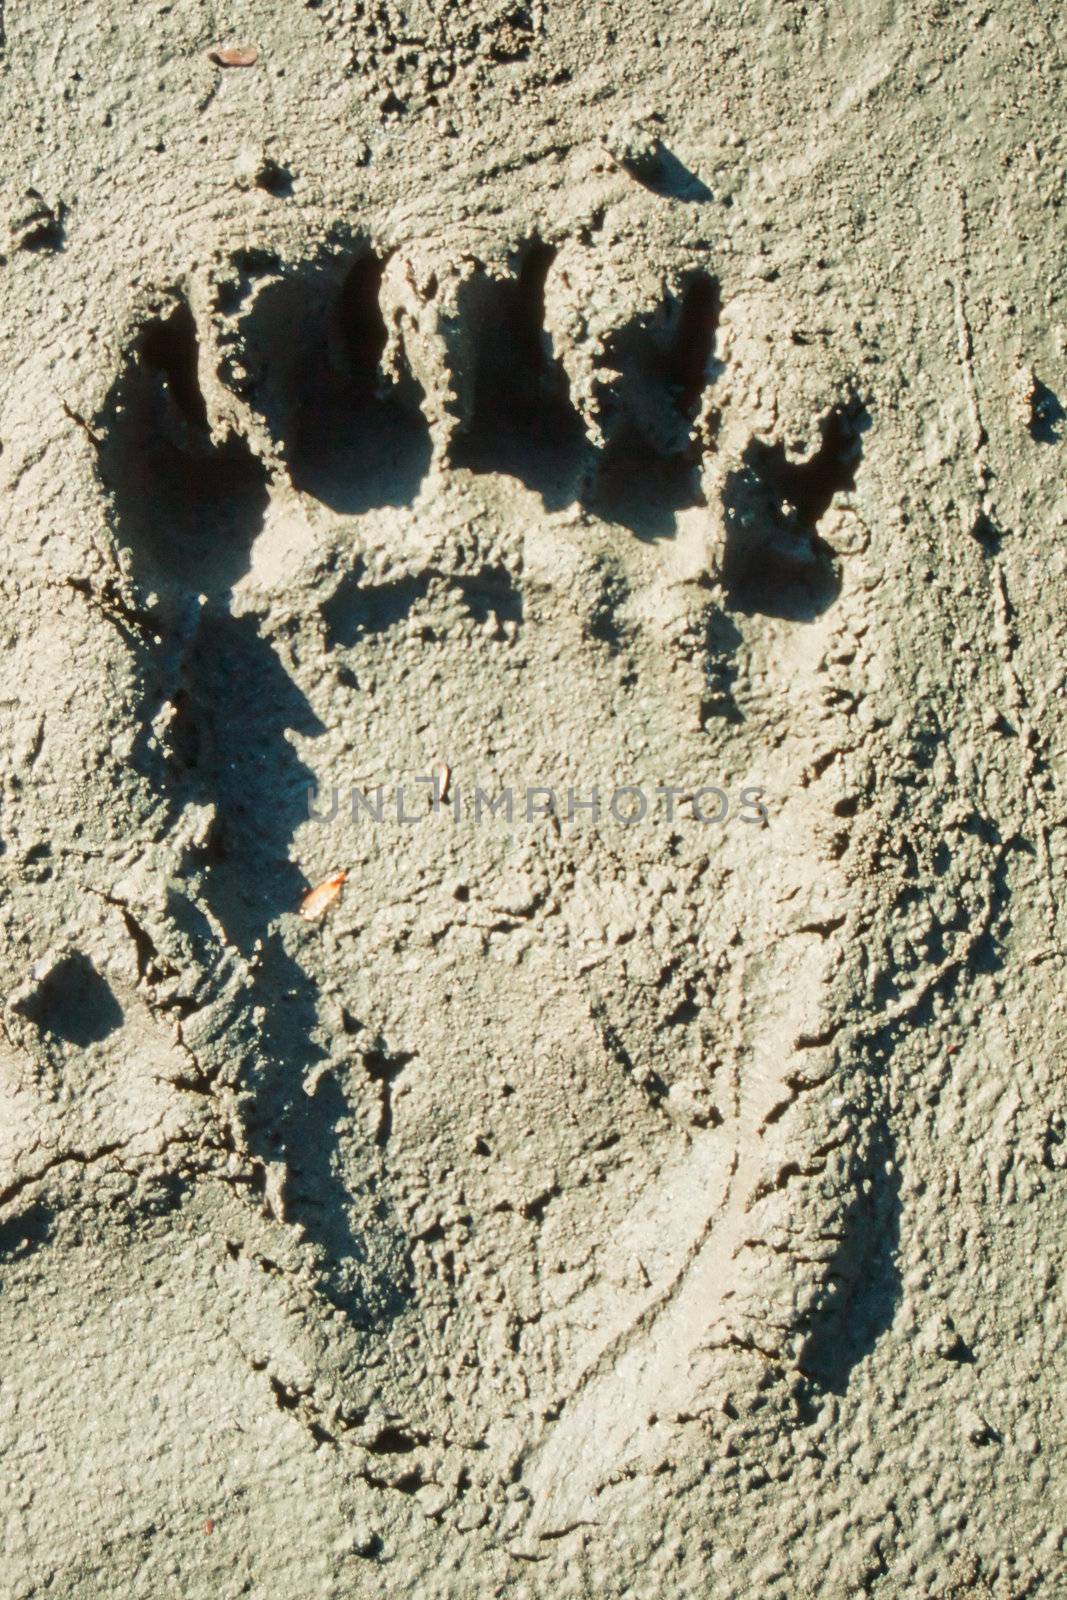 Hind foot print of grizzly bear in soft muddy ground.